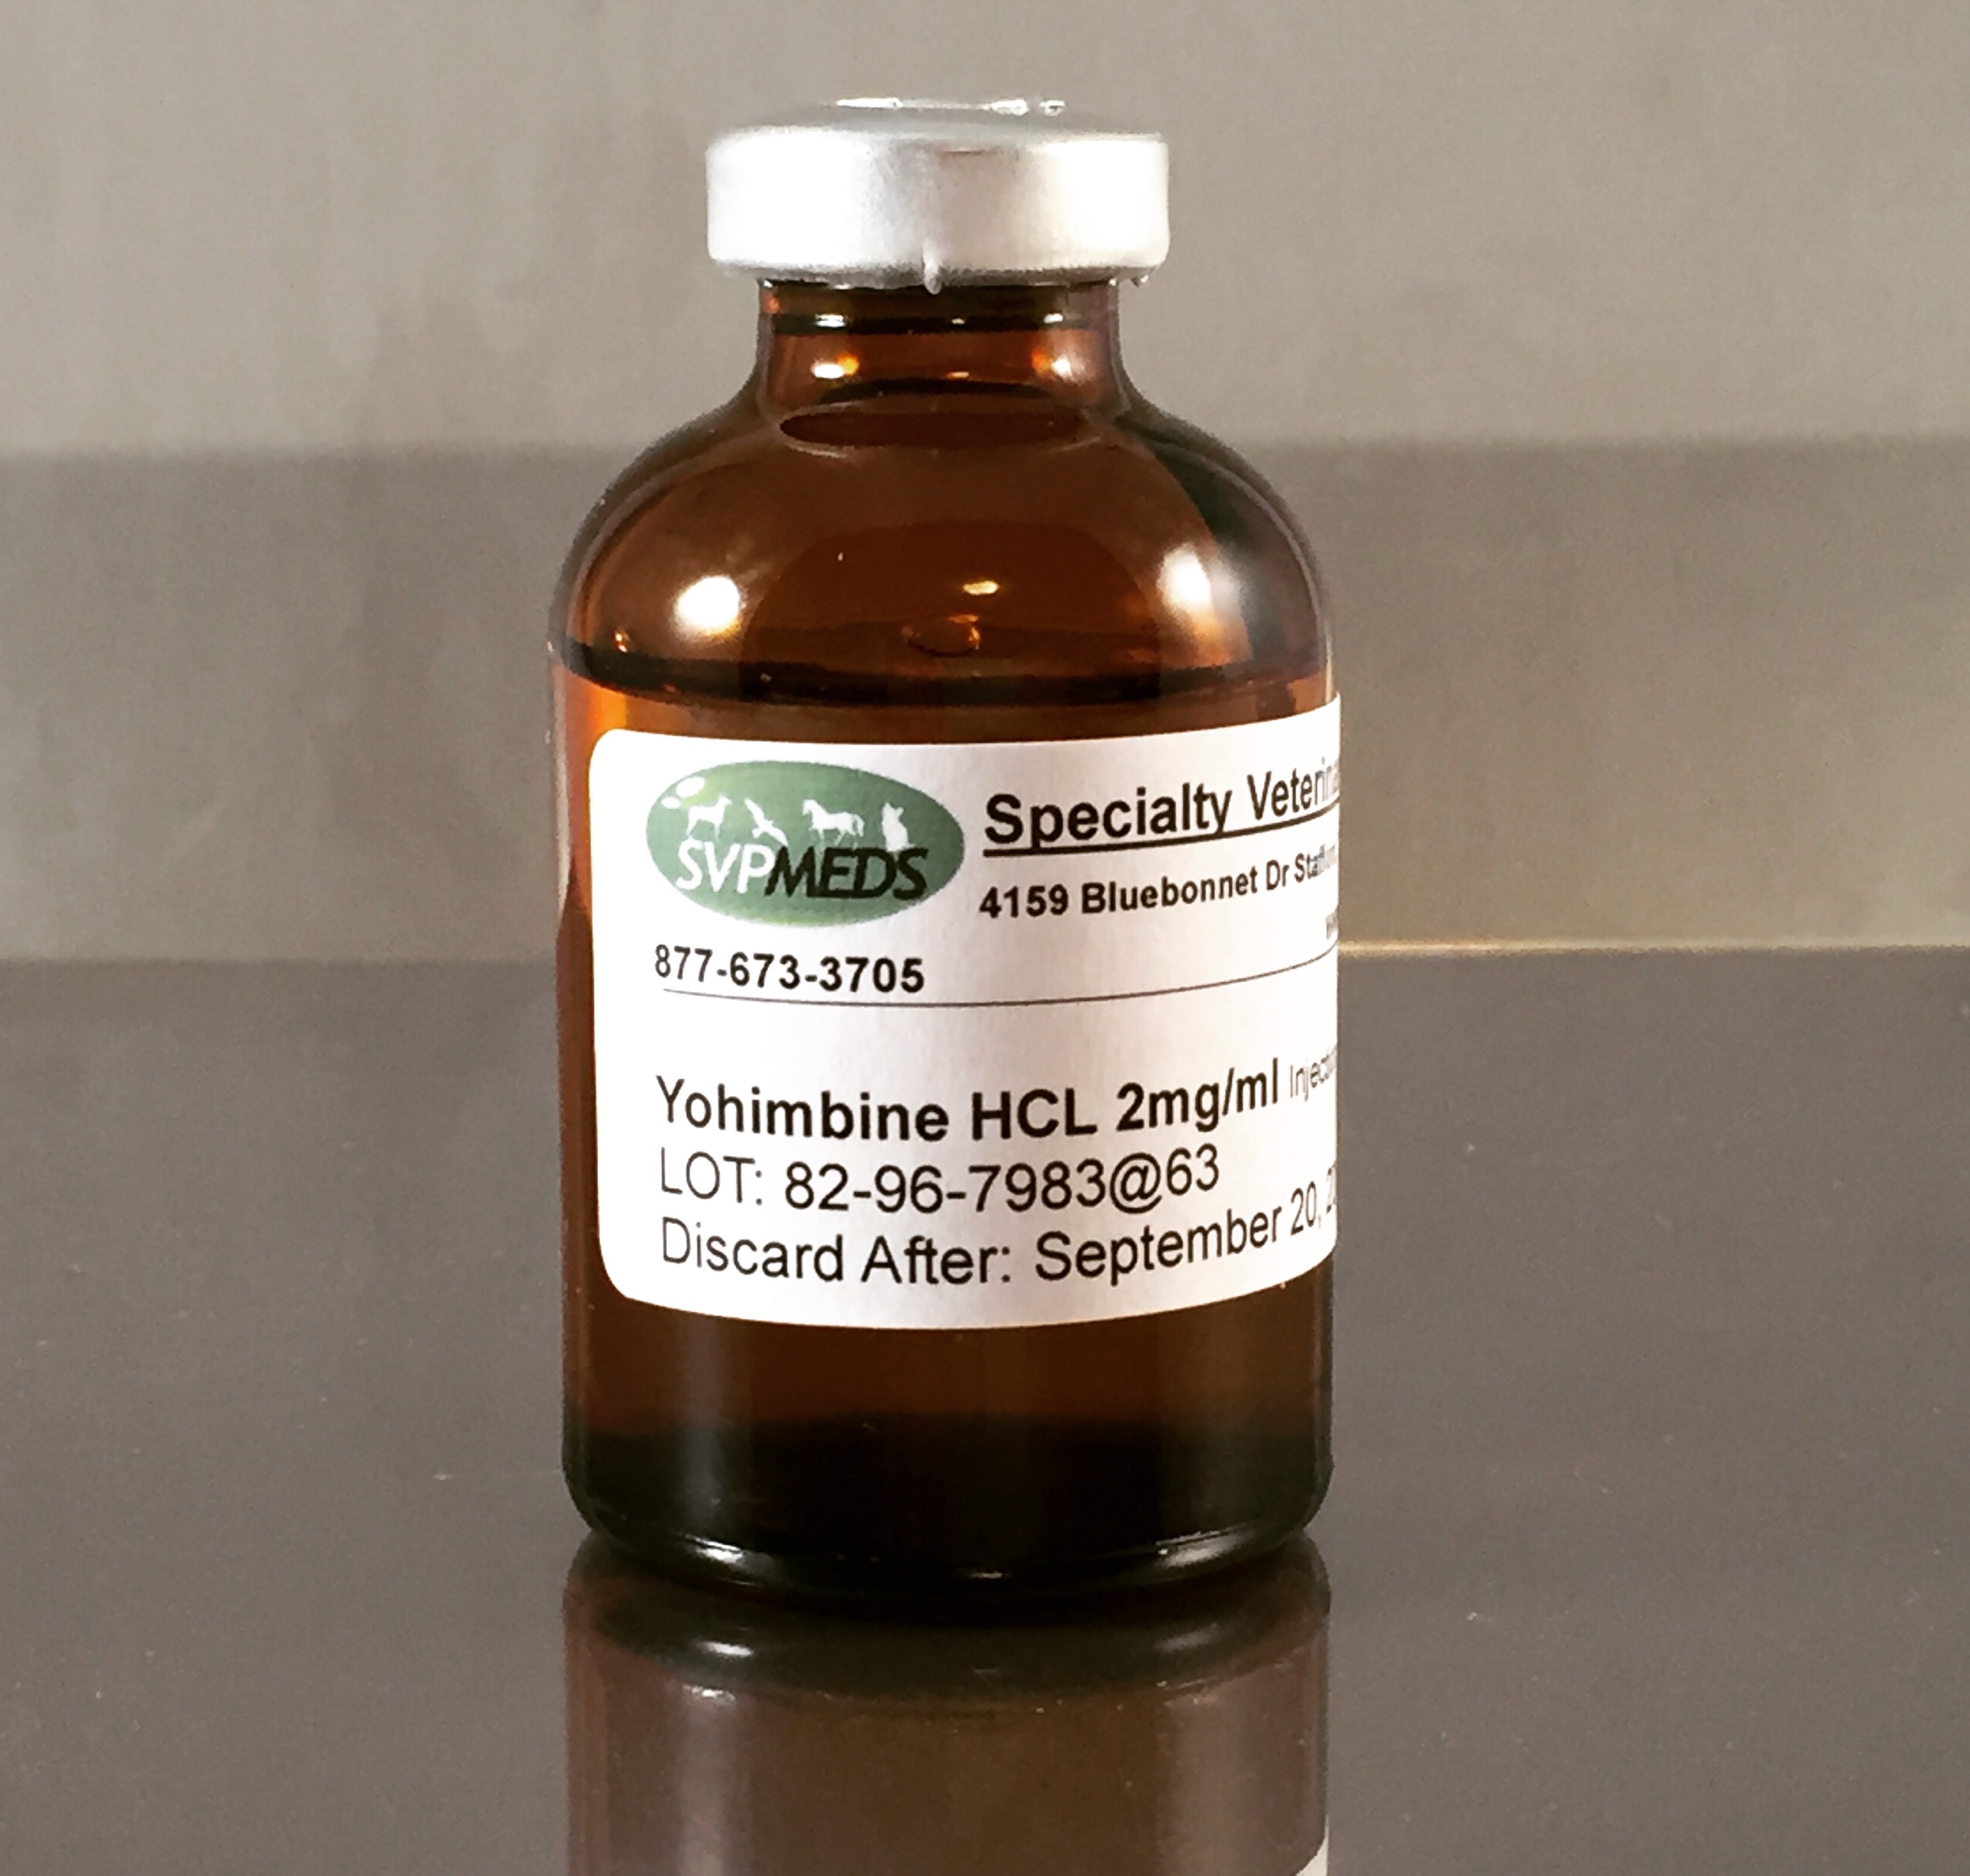 Yohimbine HCl 2mg/mL injection compounded for dogs, horses, llamas, and zoo animals.